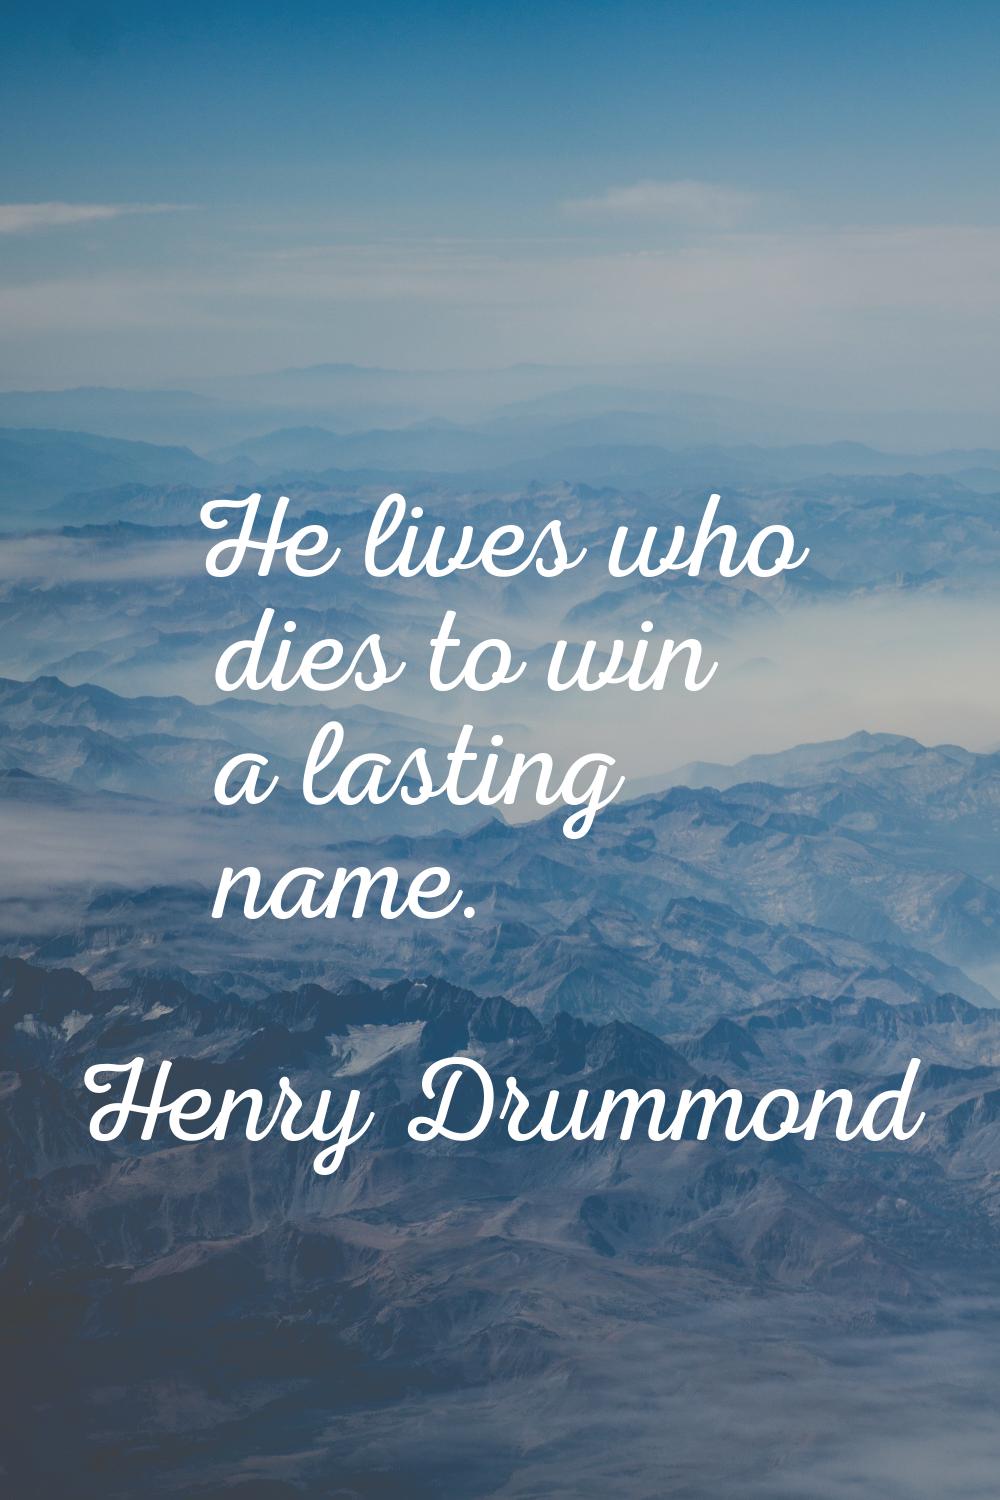 He lives who dies to win a lasting name.